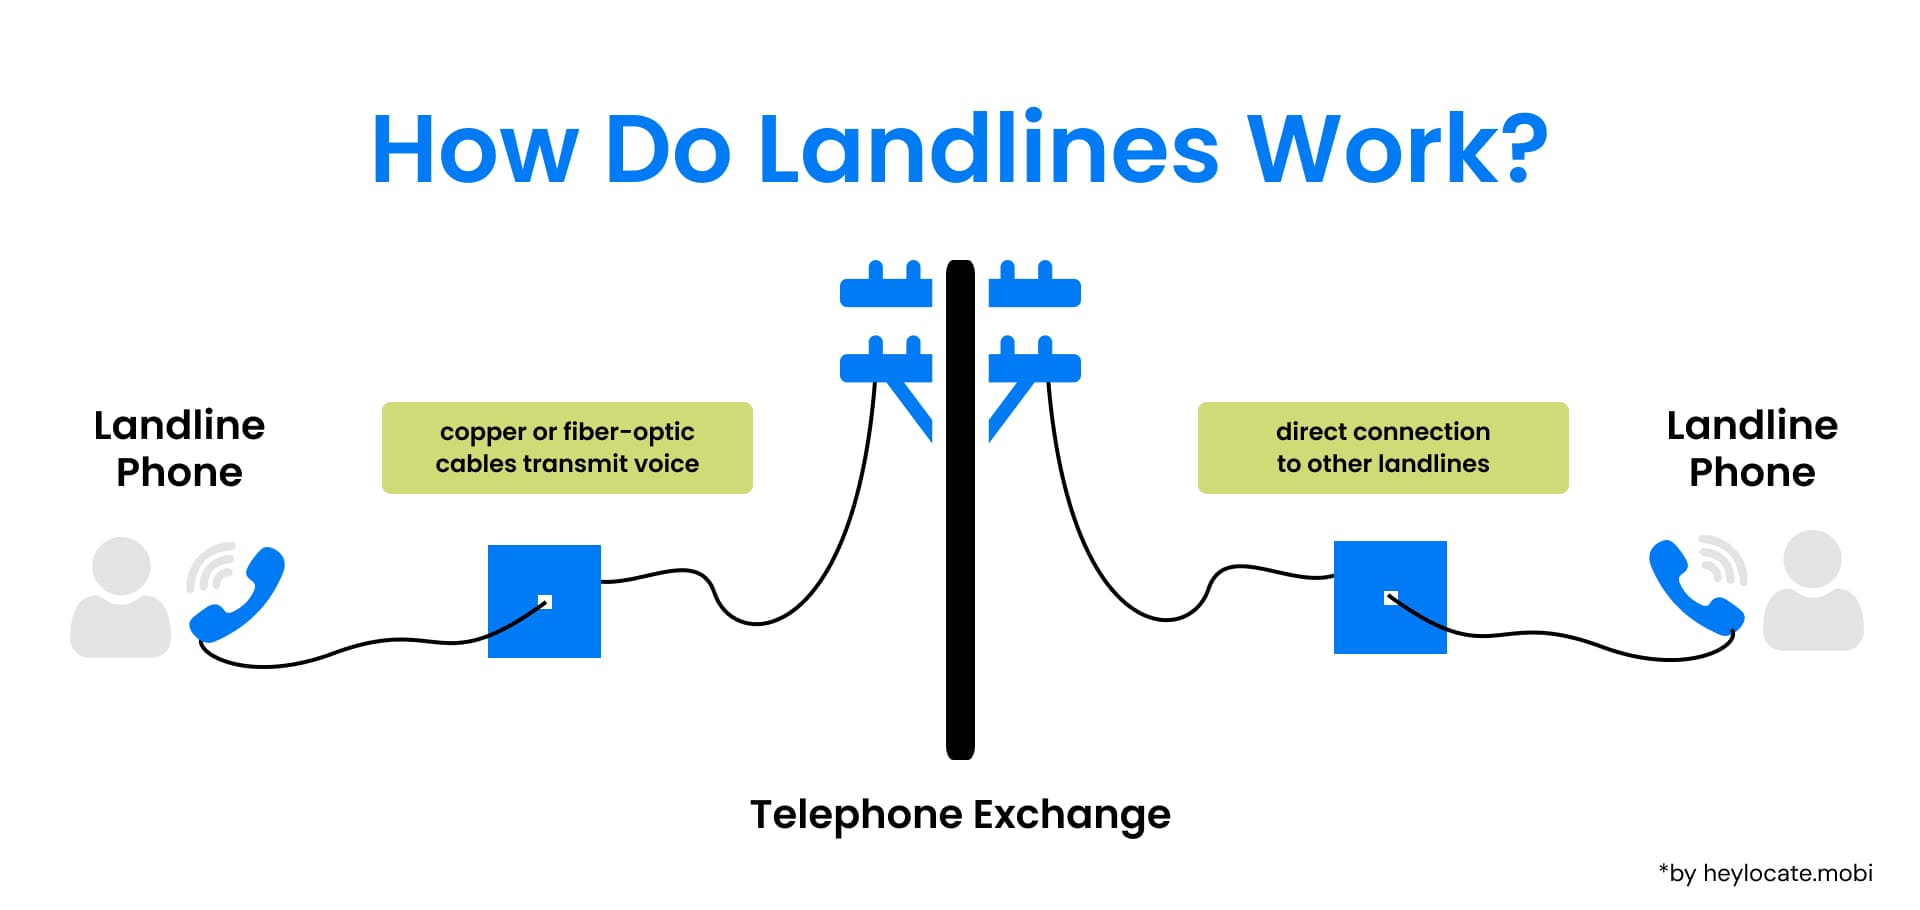 Understanding Landline Connections: The journey of a voice call from one landline phone to another via the telephone exchange